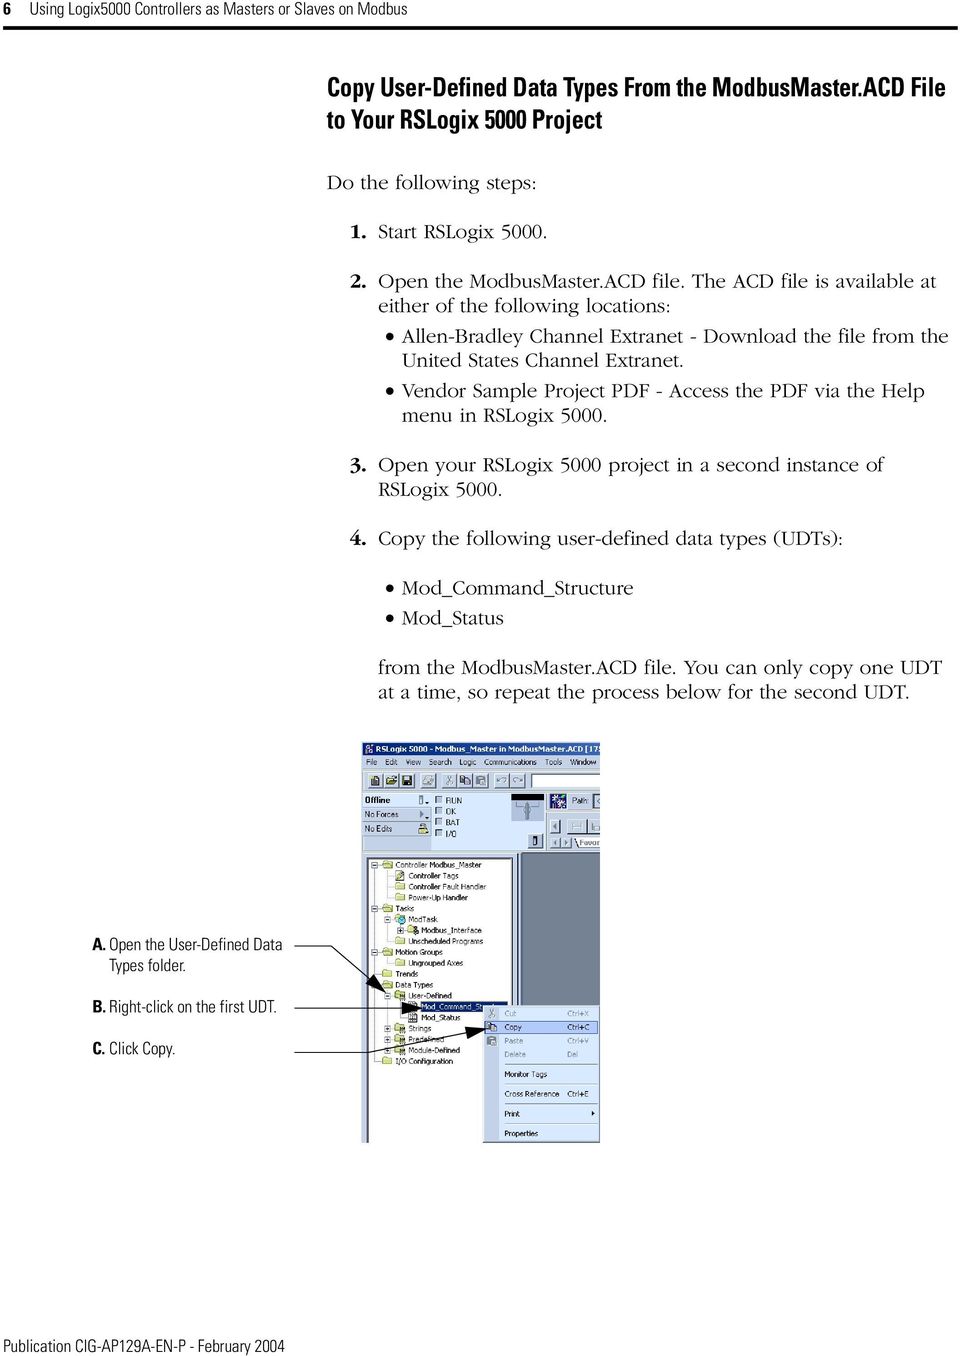 Vendor Sample Project PDF - Access the PDF via the Help menu in RSLogix 5000. 3. Open your RSLogix 5000 project in a second instance of RSLogix 5000. 4.